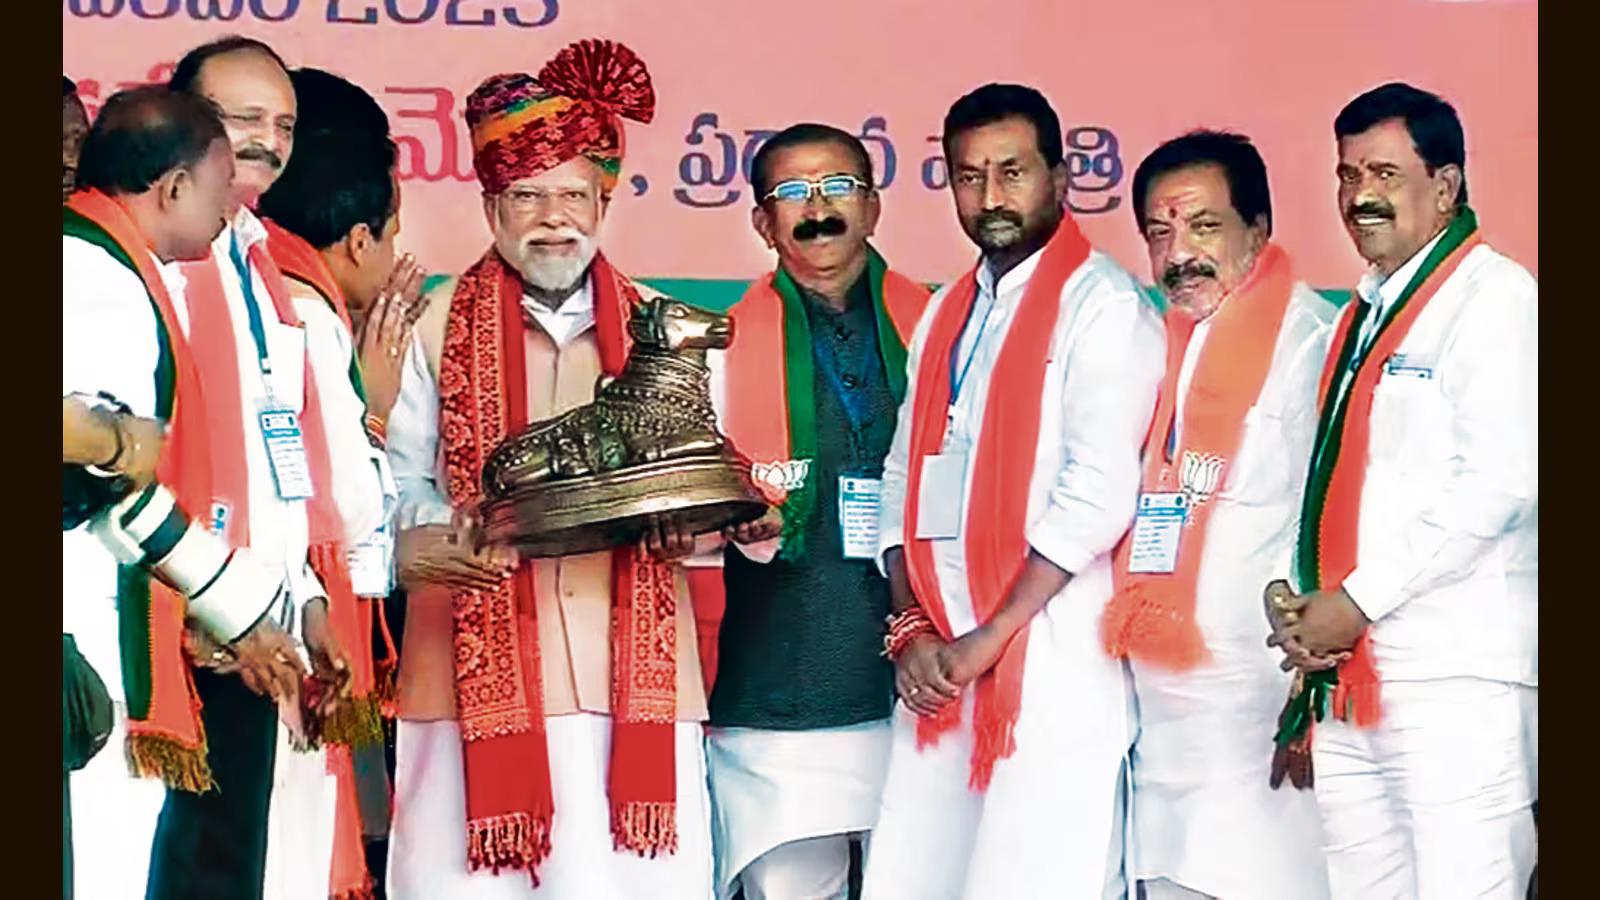 Modi Asserts BJP’s Ascent in Telangana, Criticizes KCR’s Unfulfilled Promises and Scams